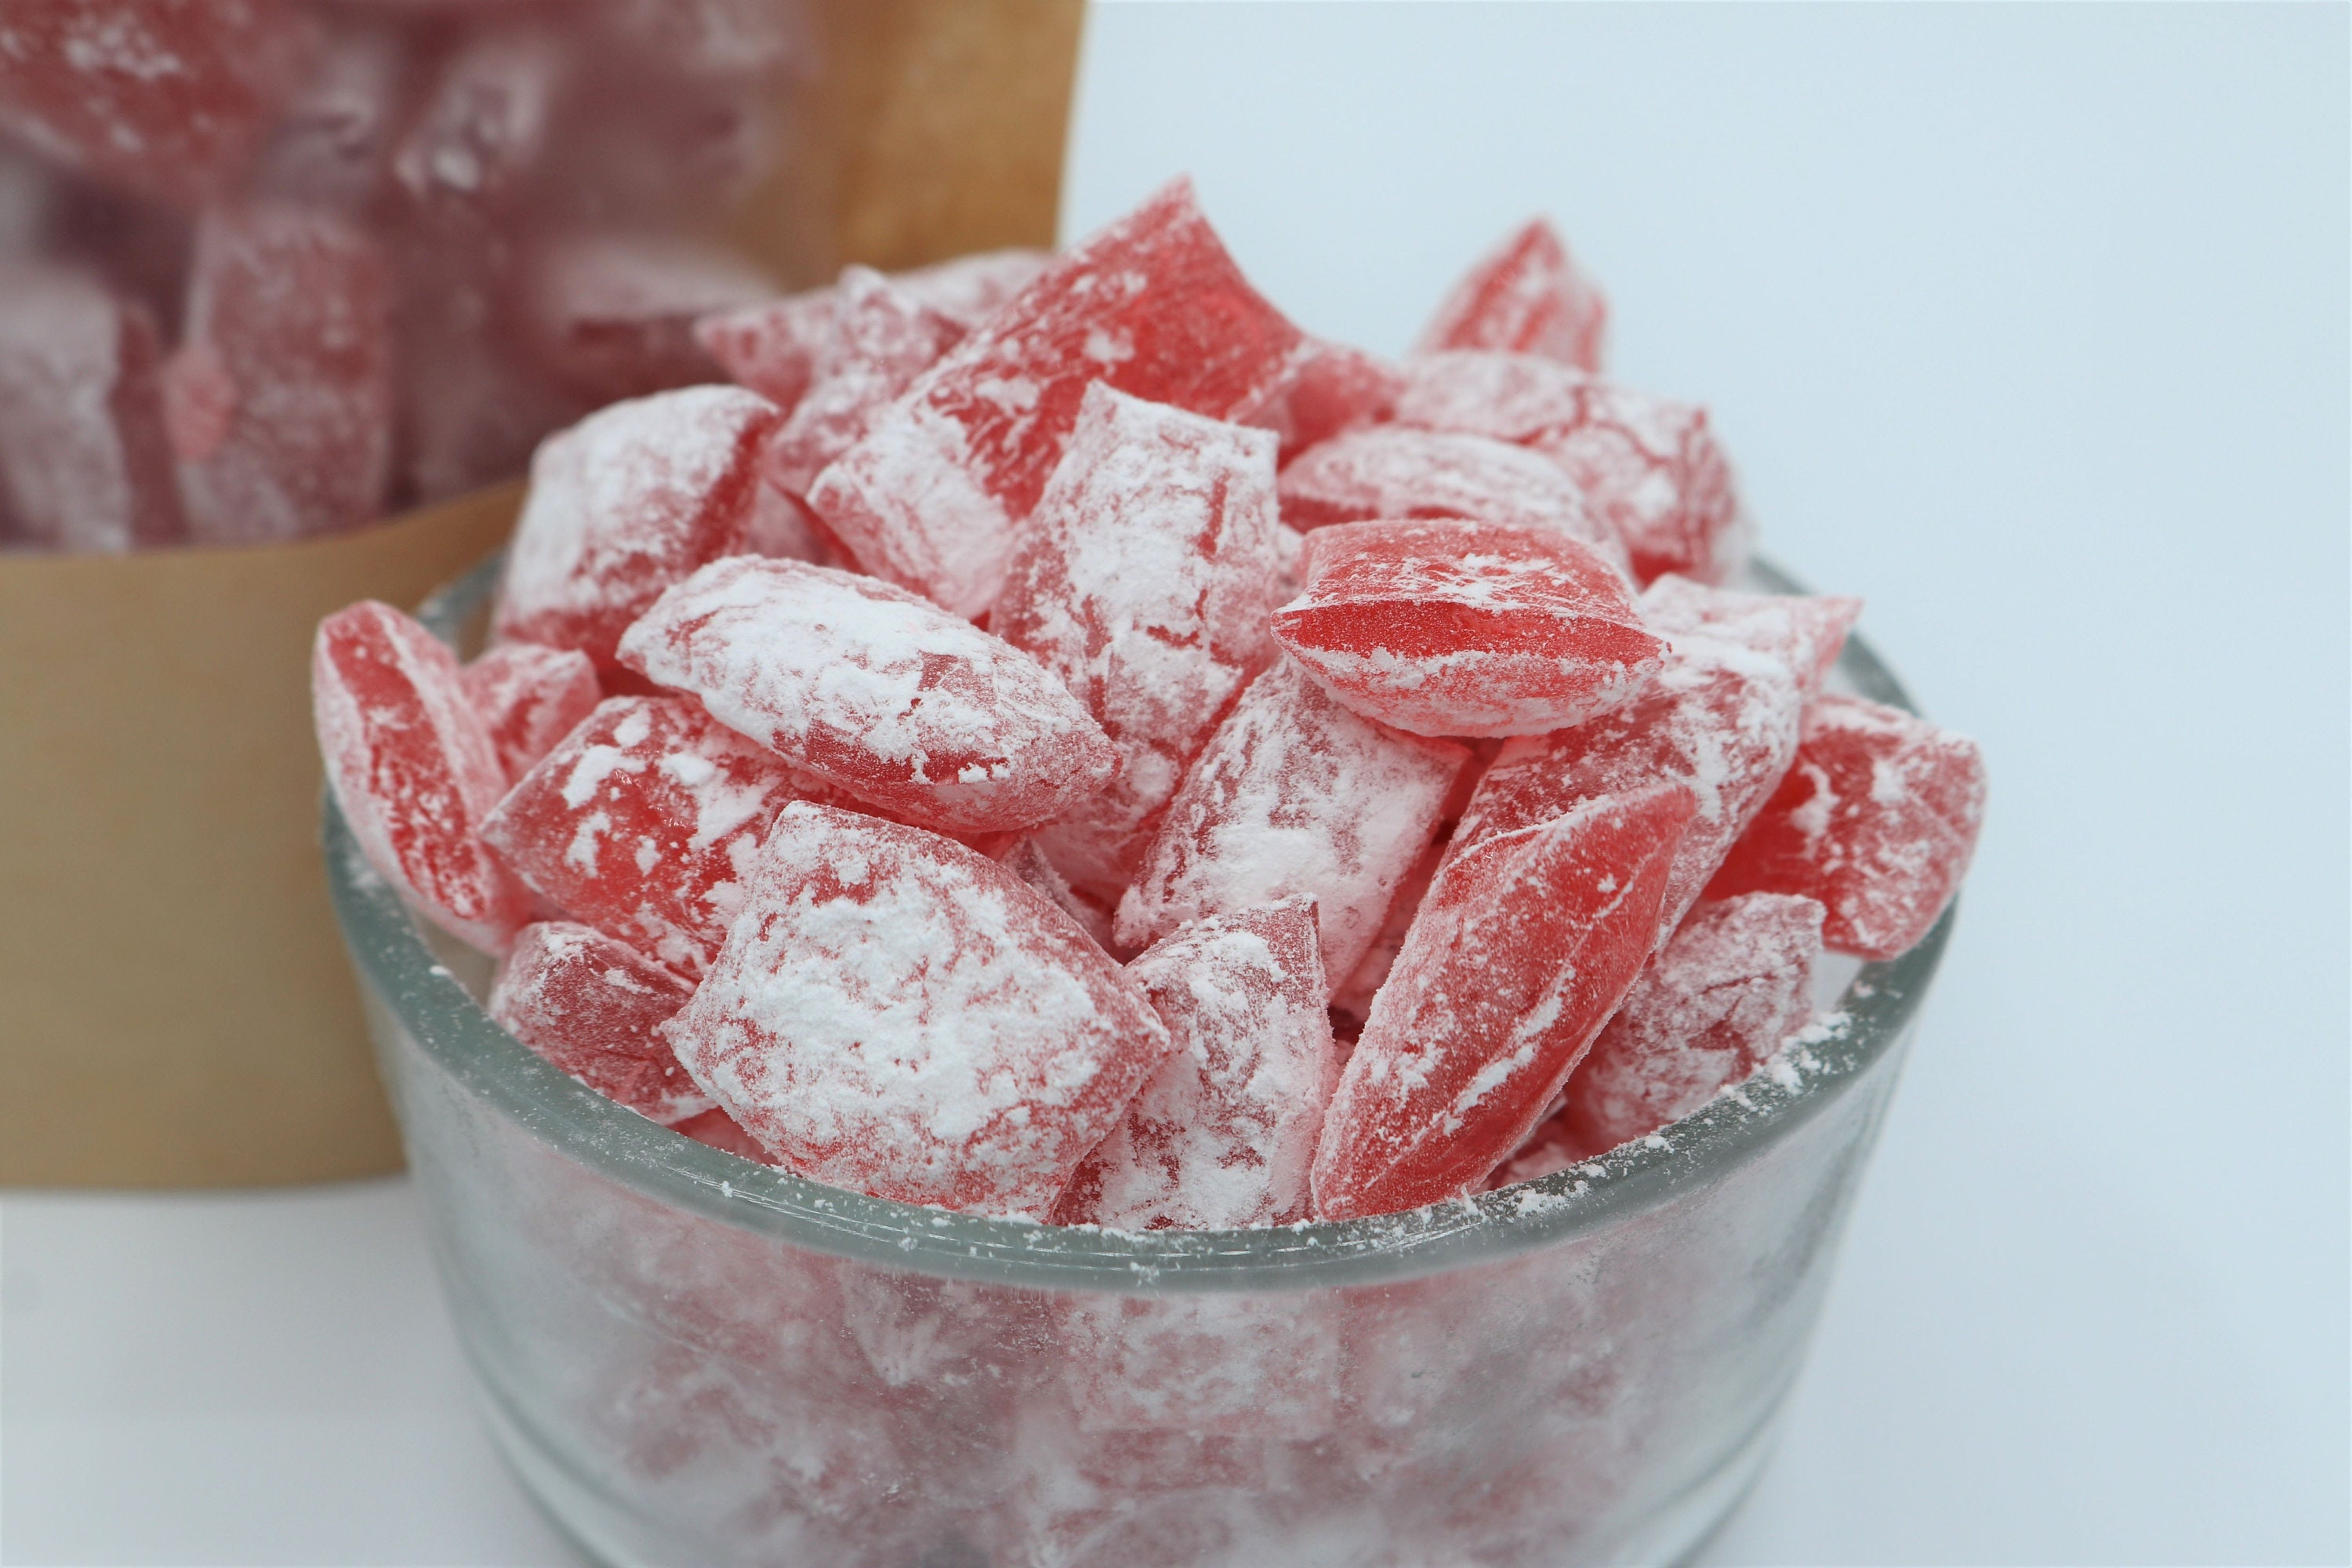 Hard Tack Candy {Vintage Candy Recipe}